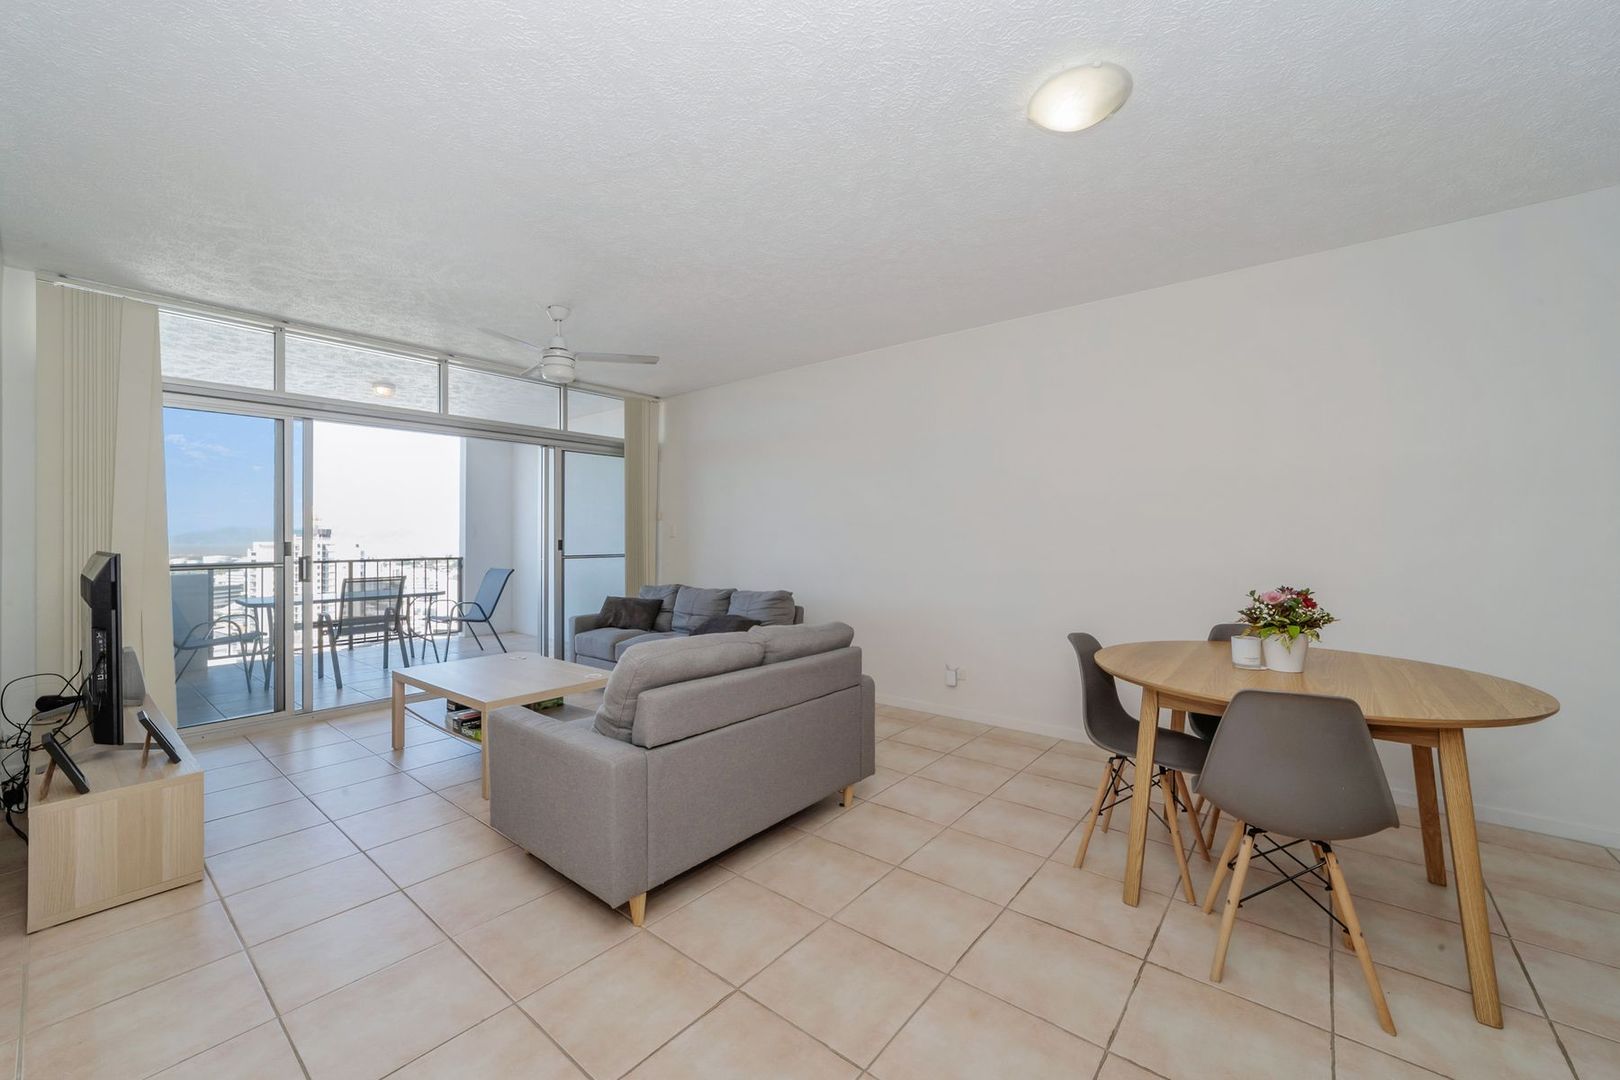 69/1 Stanton Terrace, Townsville City QLD 4810, Image 2